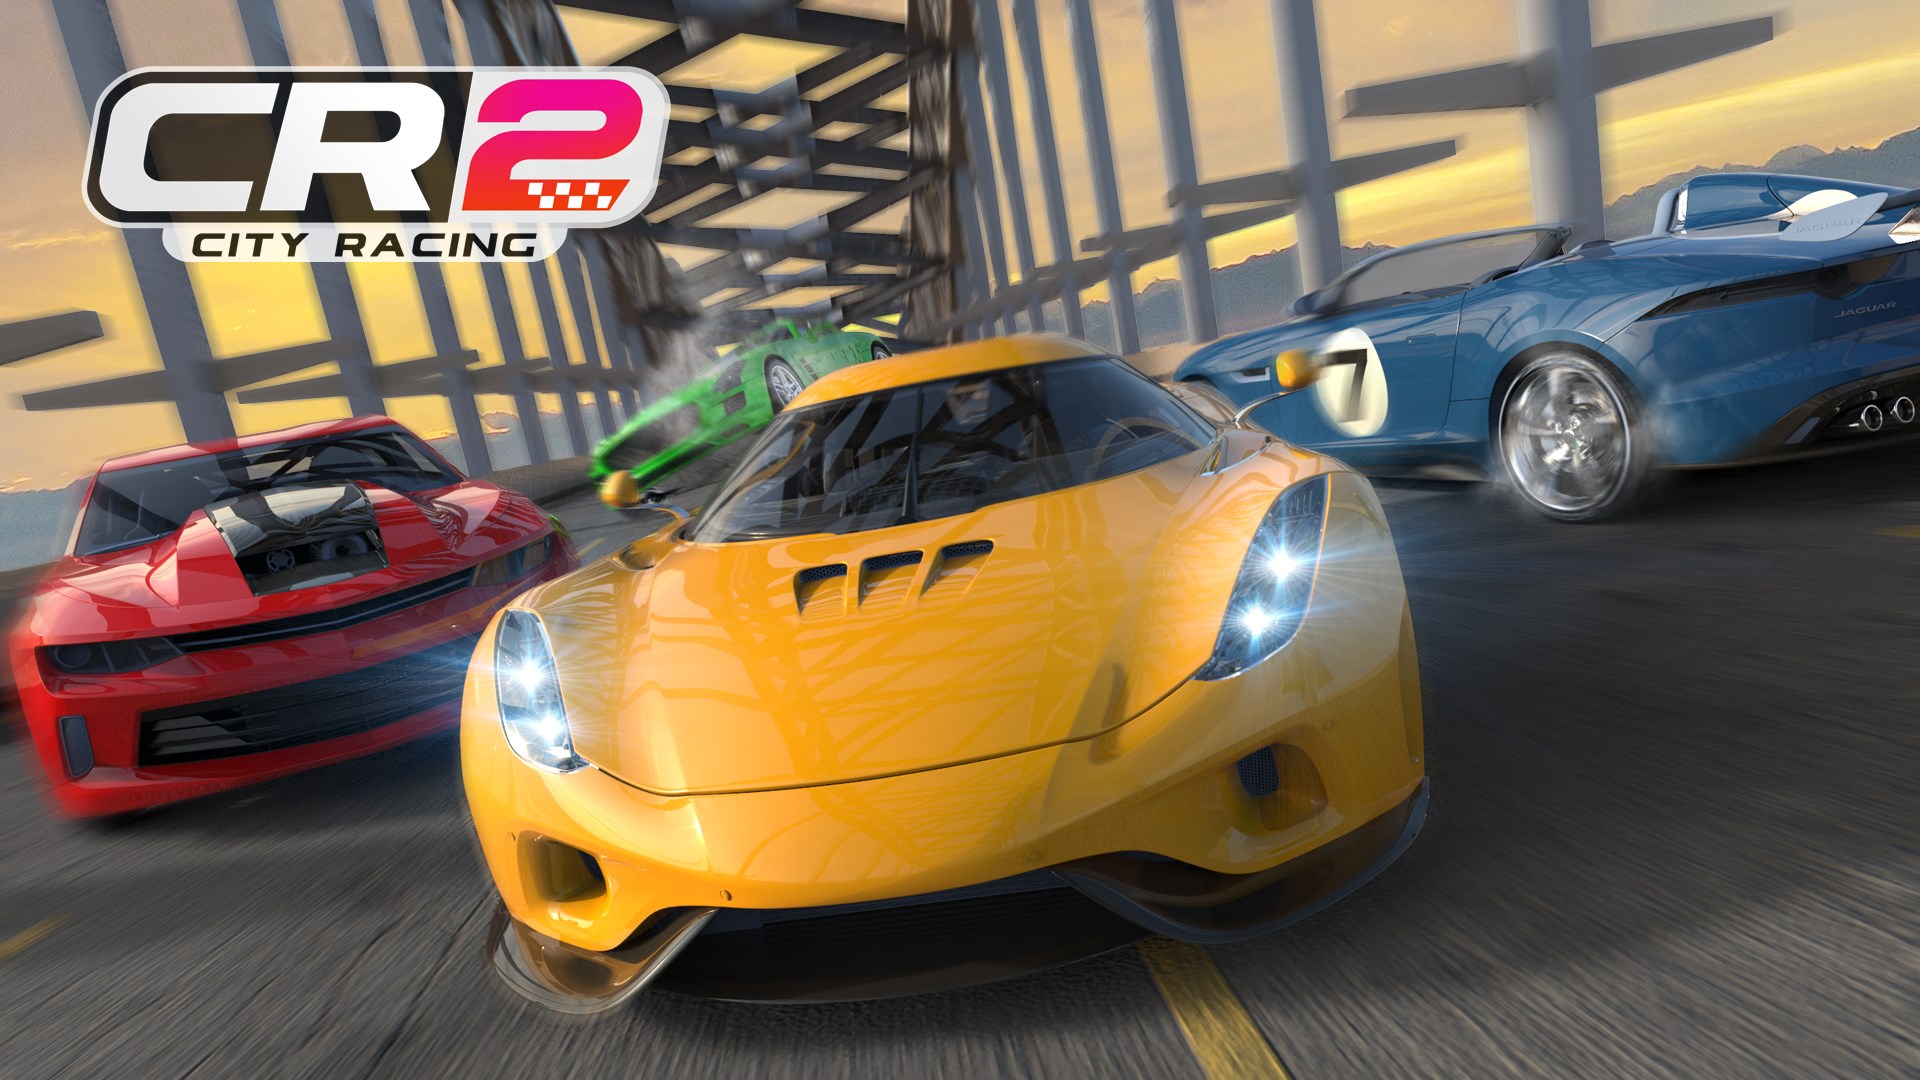 Fun Racing Game for 2 Players,New Awesome 3D Car Racing Games